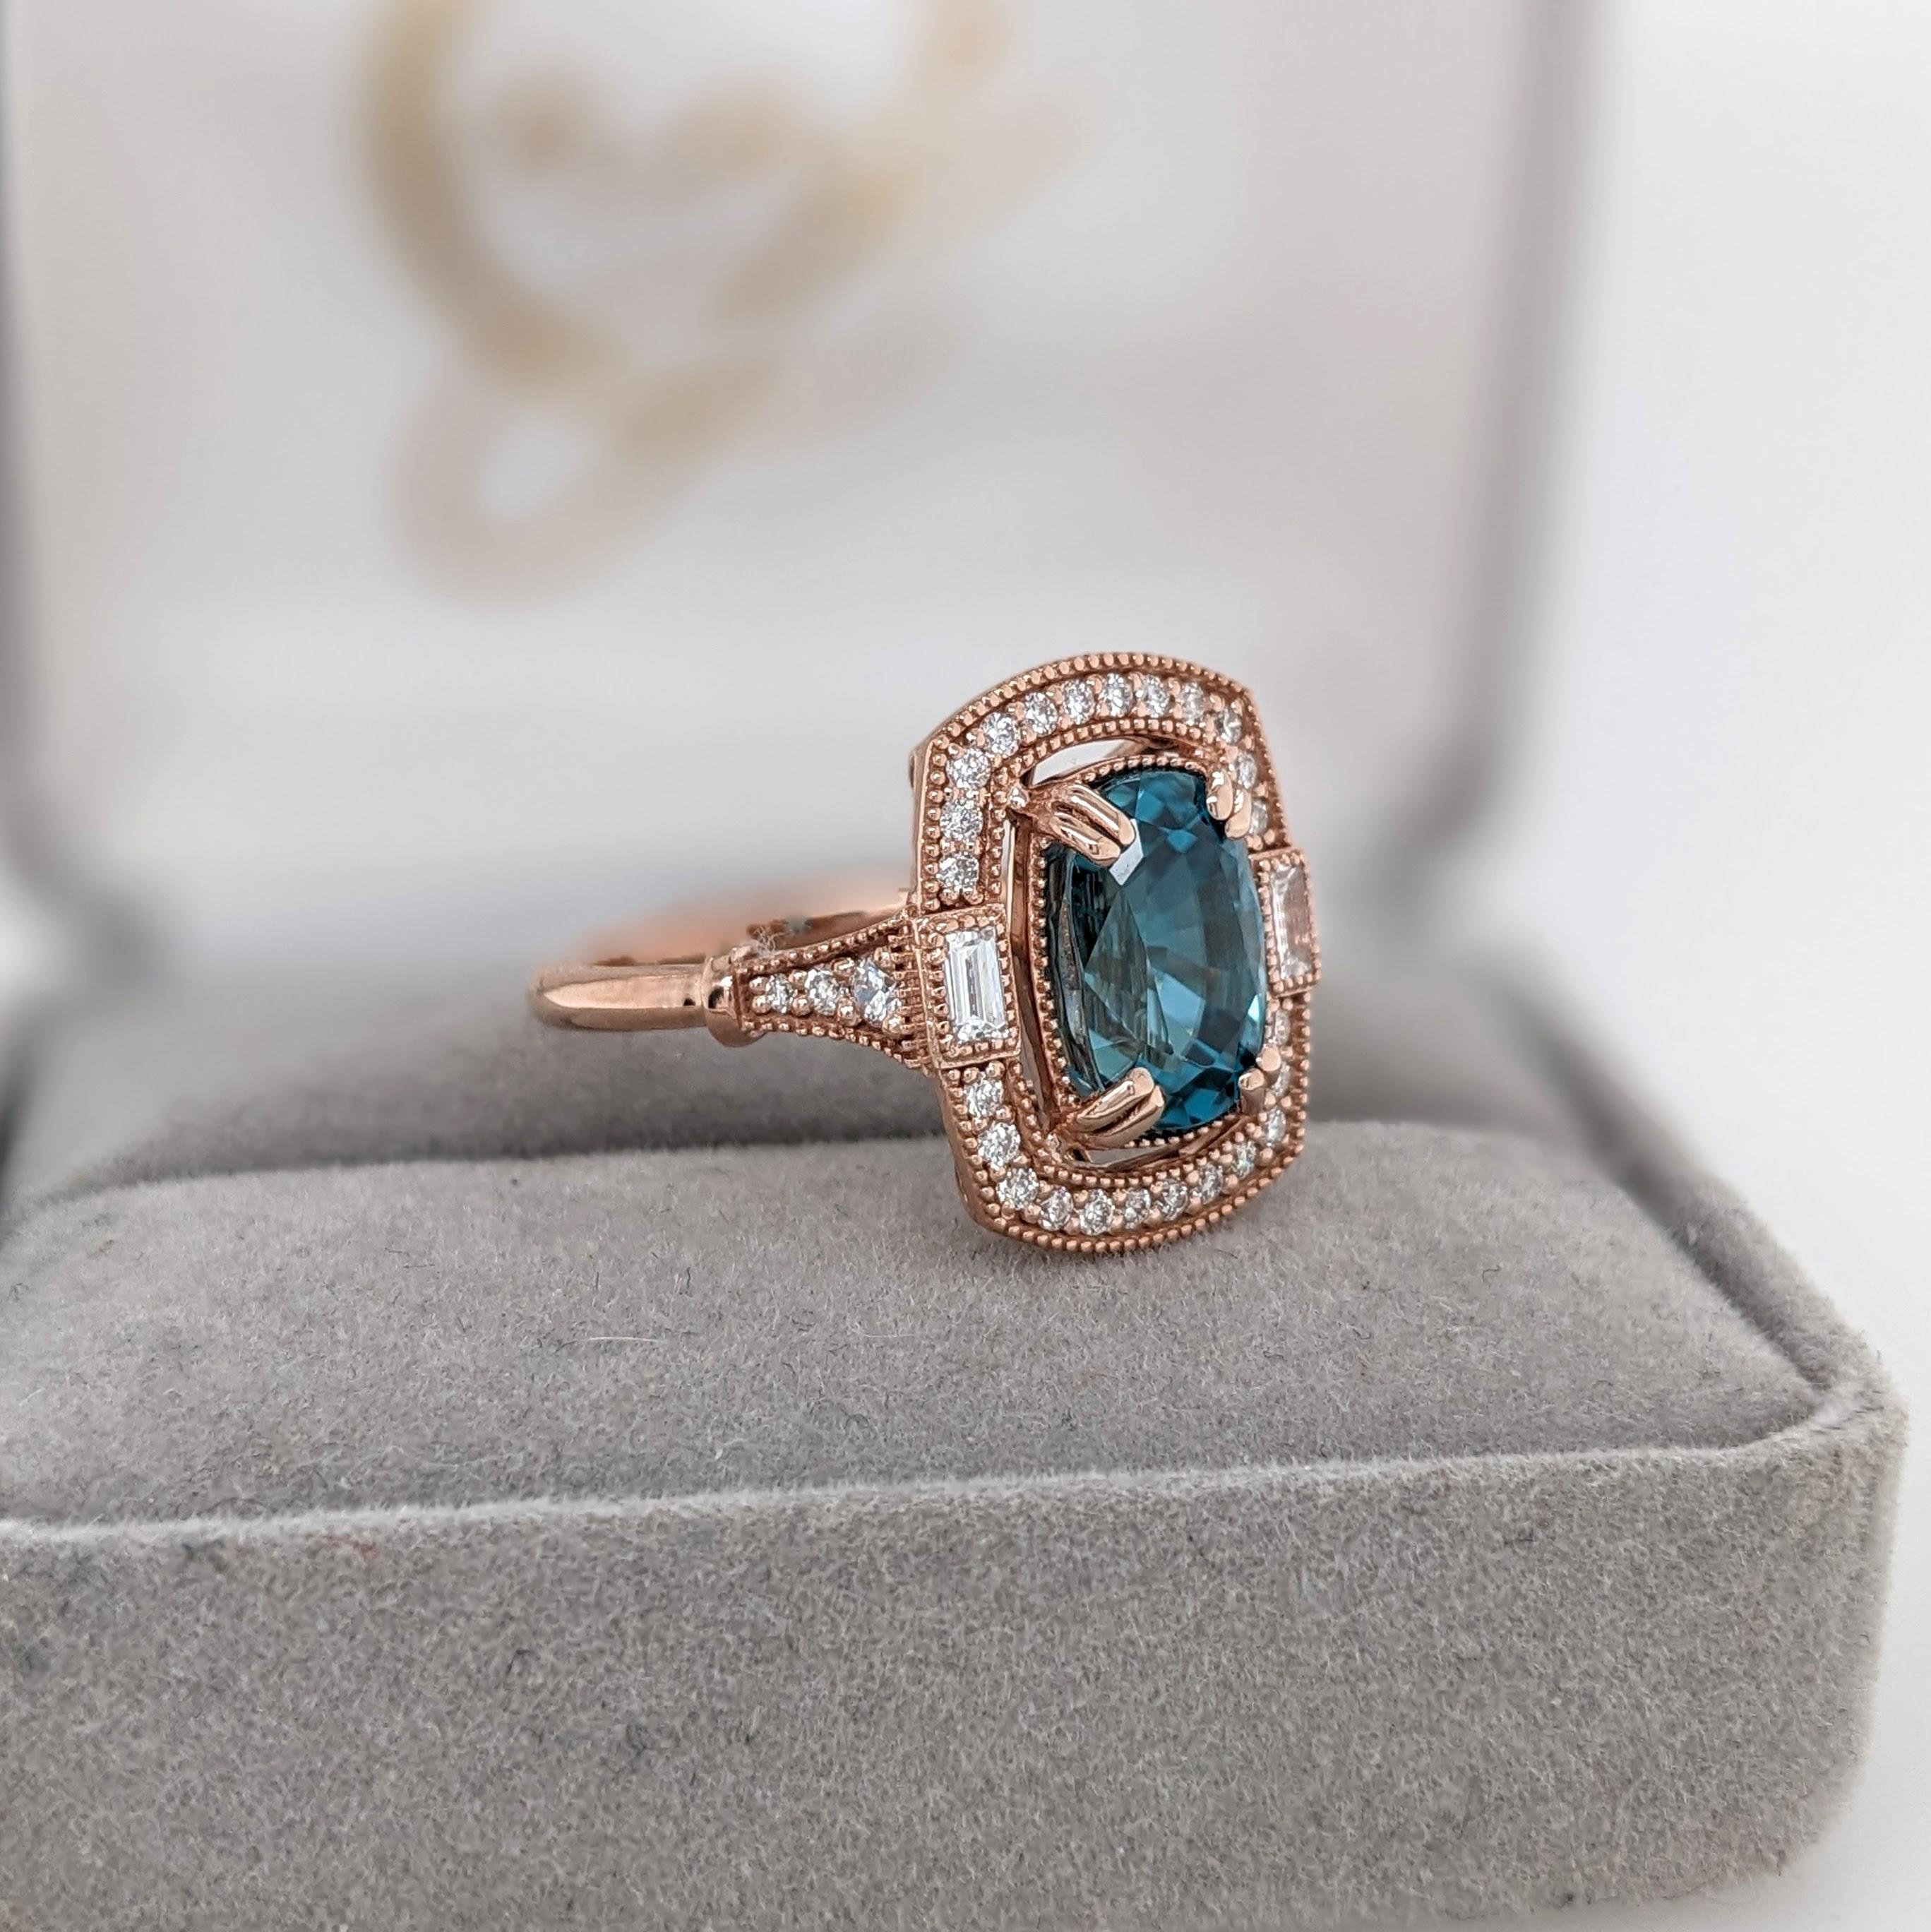 5.4ct Blue Zircon Ring w Earth Mined Diamonds in Solid 14K Rose Gold CU 10x7mm For Sale 2